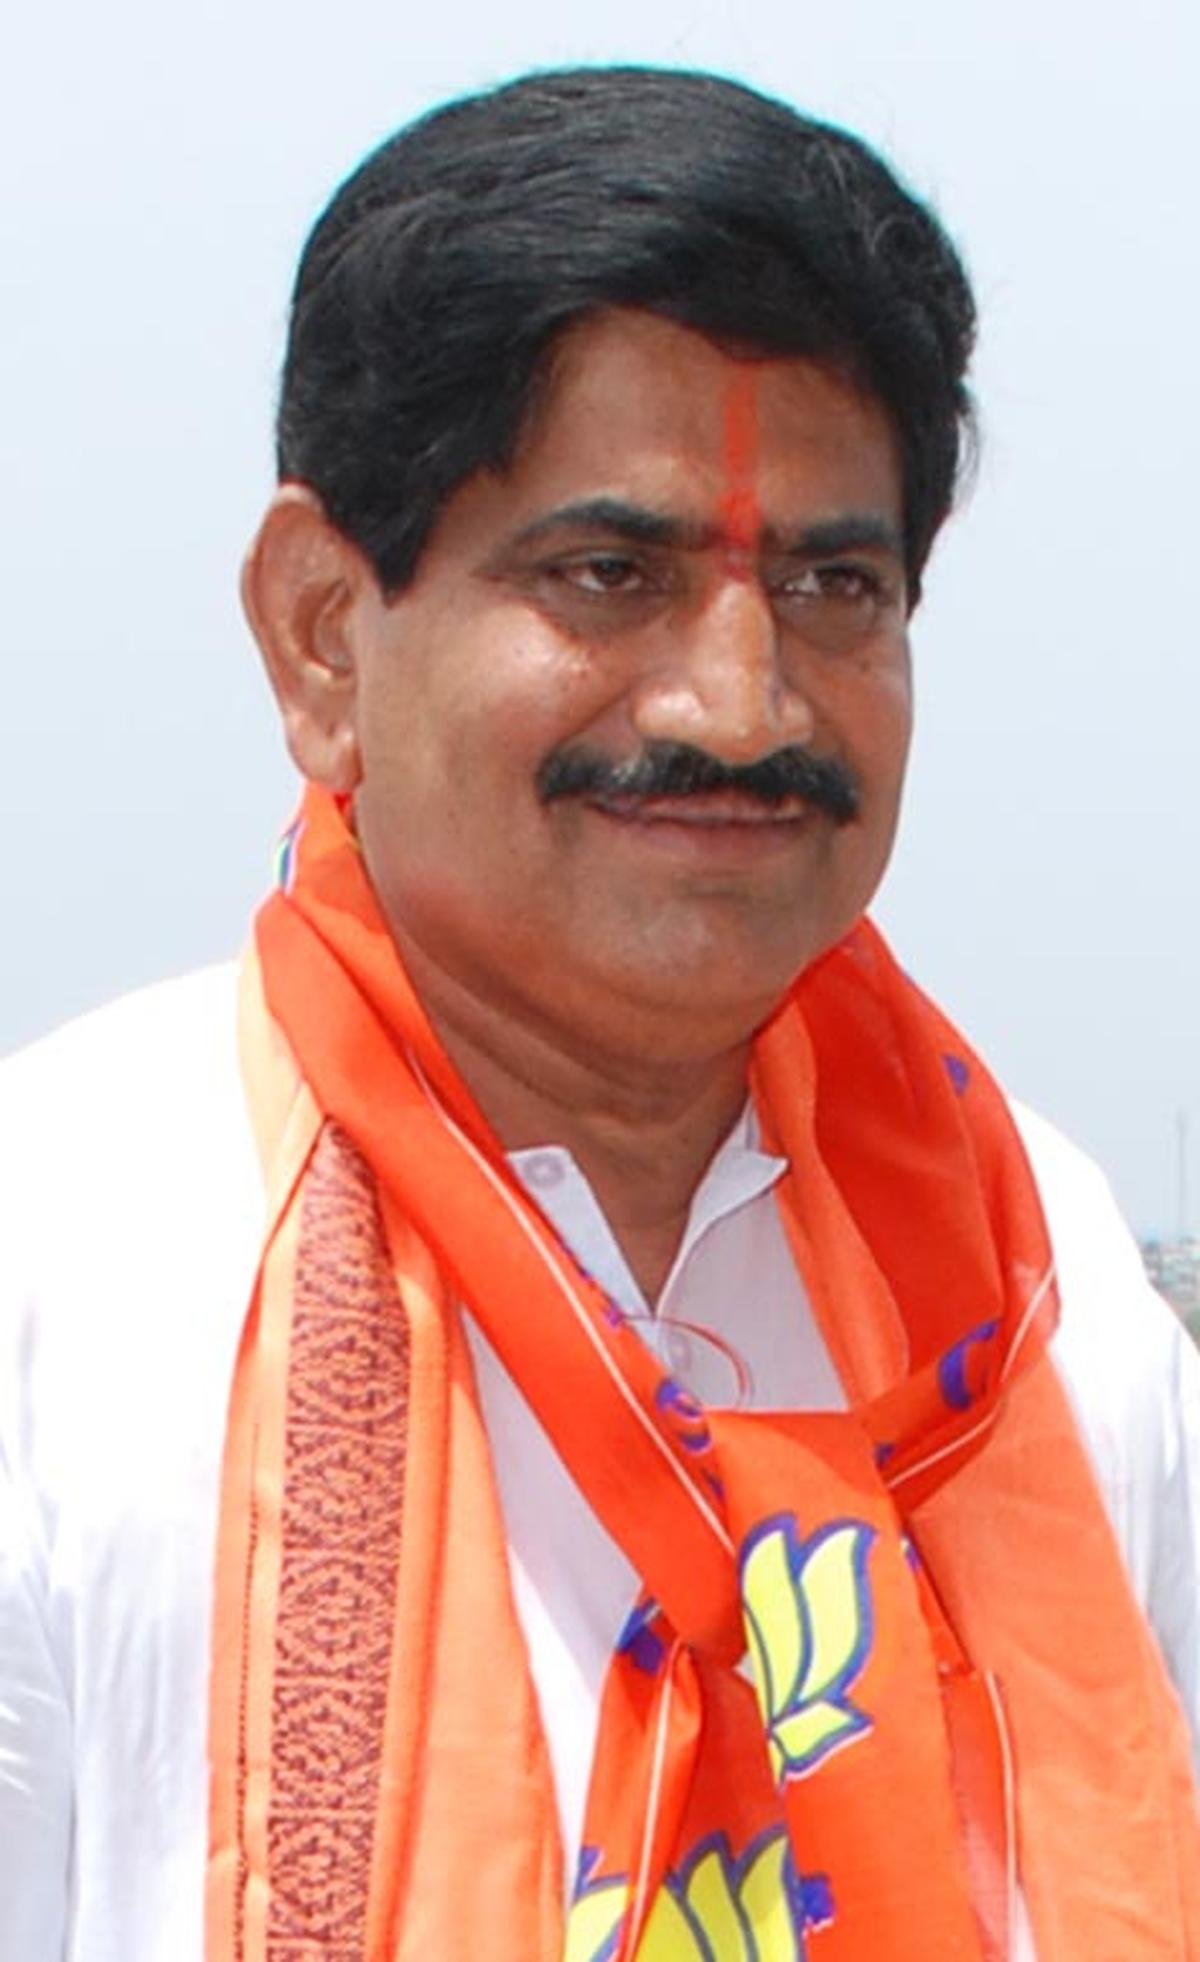 BJP candidate Parvatagouda C. Gaddigoudar's campaign was the most muted among North Karnataka leaders, as he won in Bagalkot.